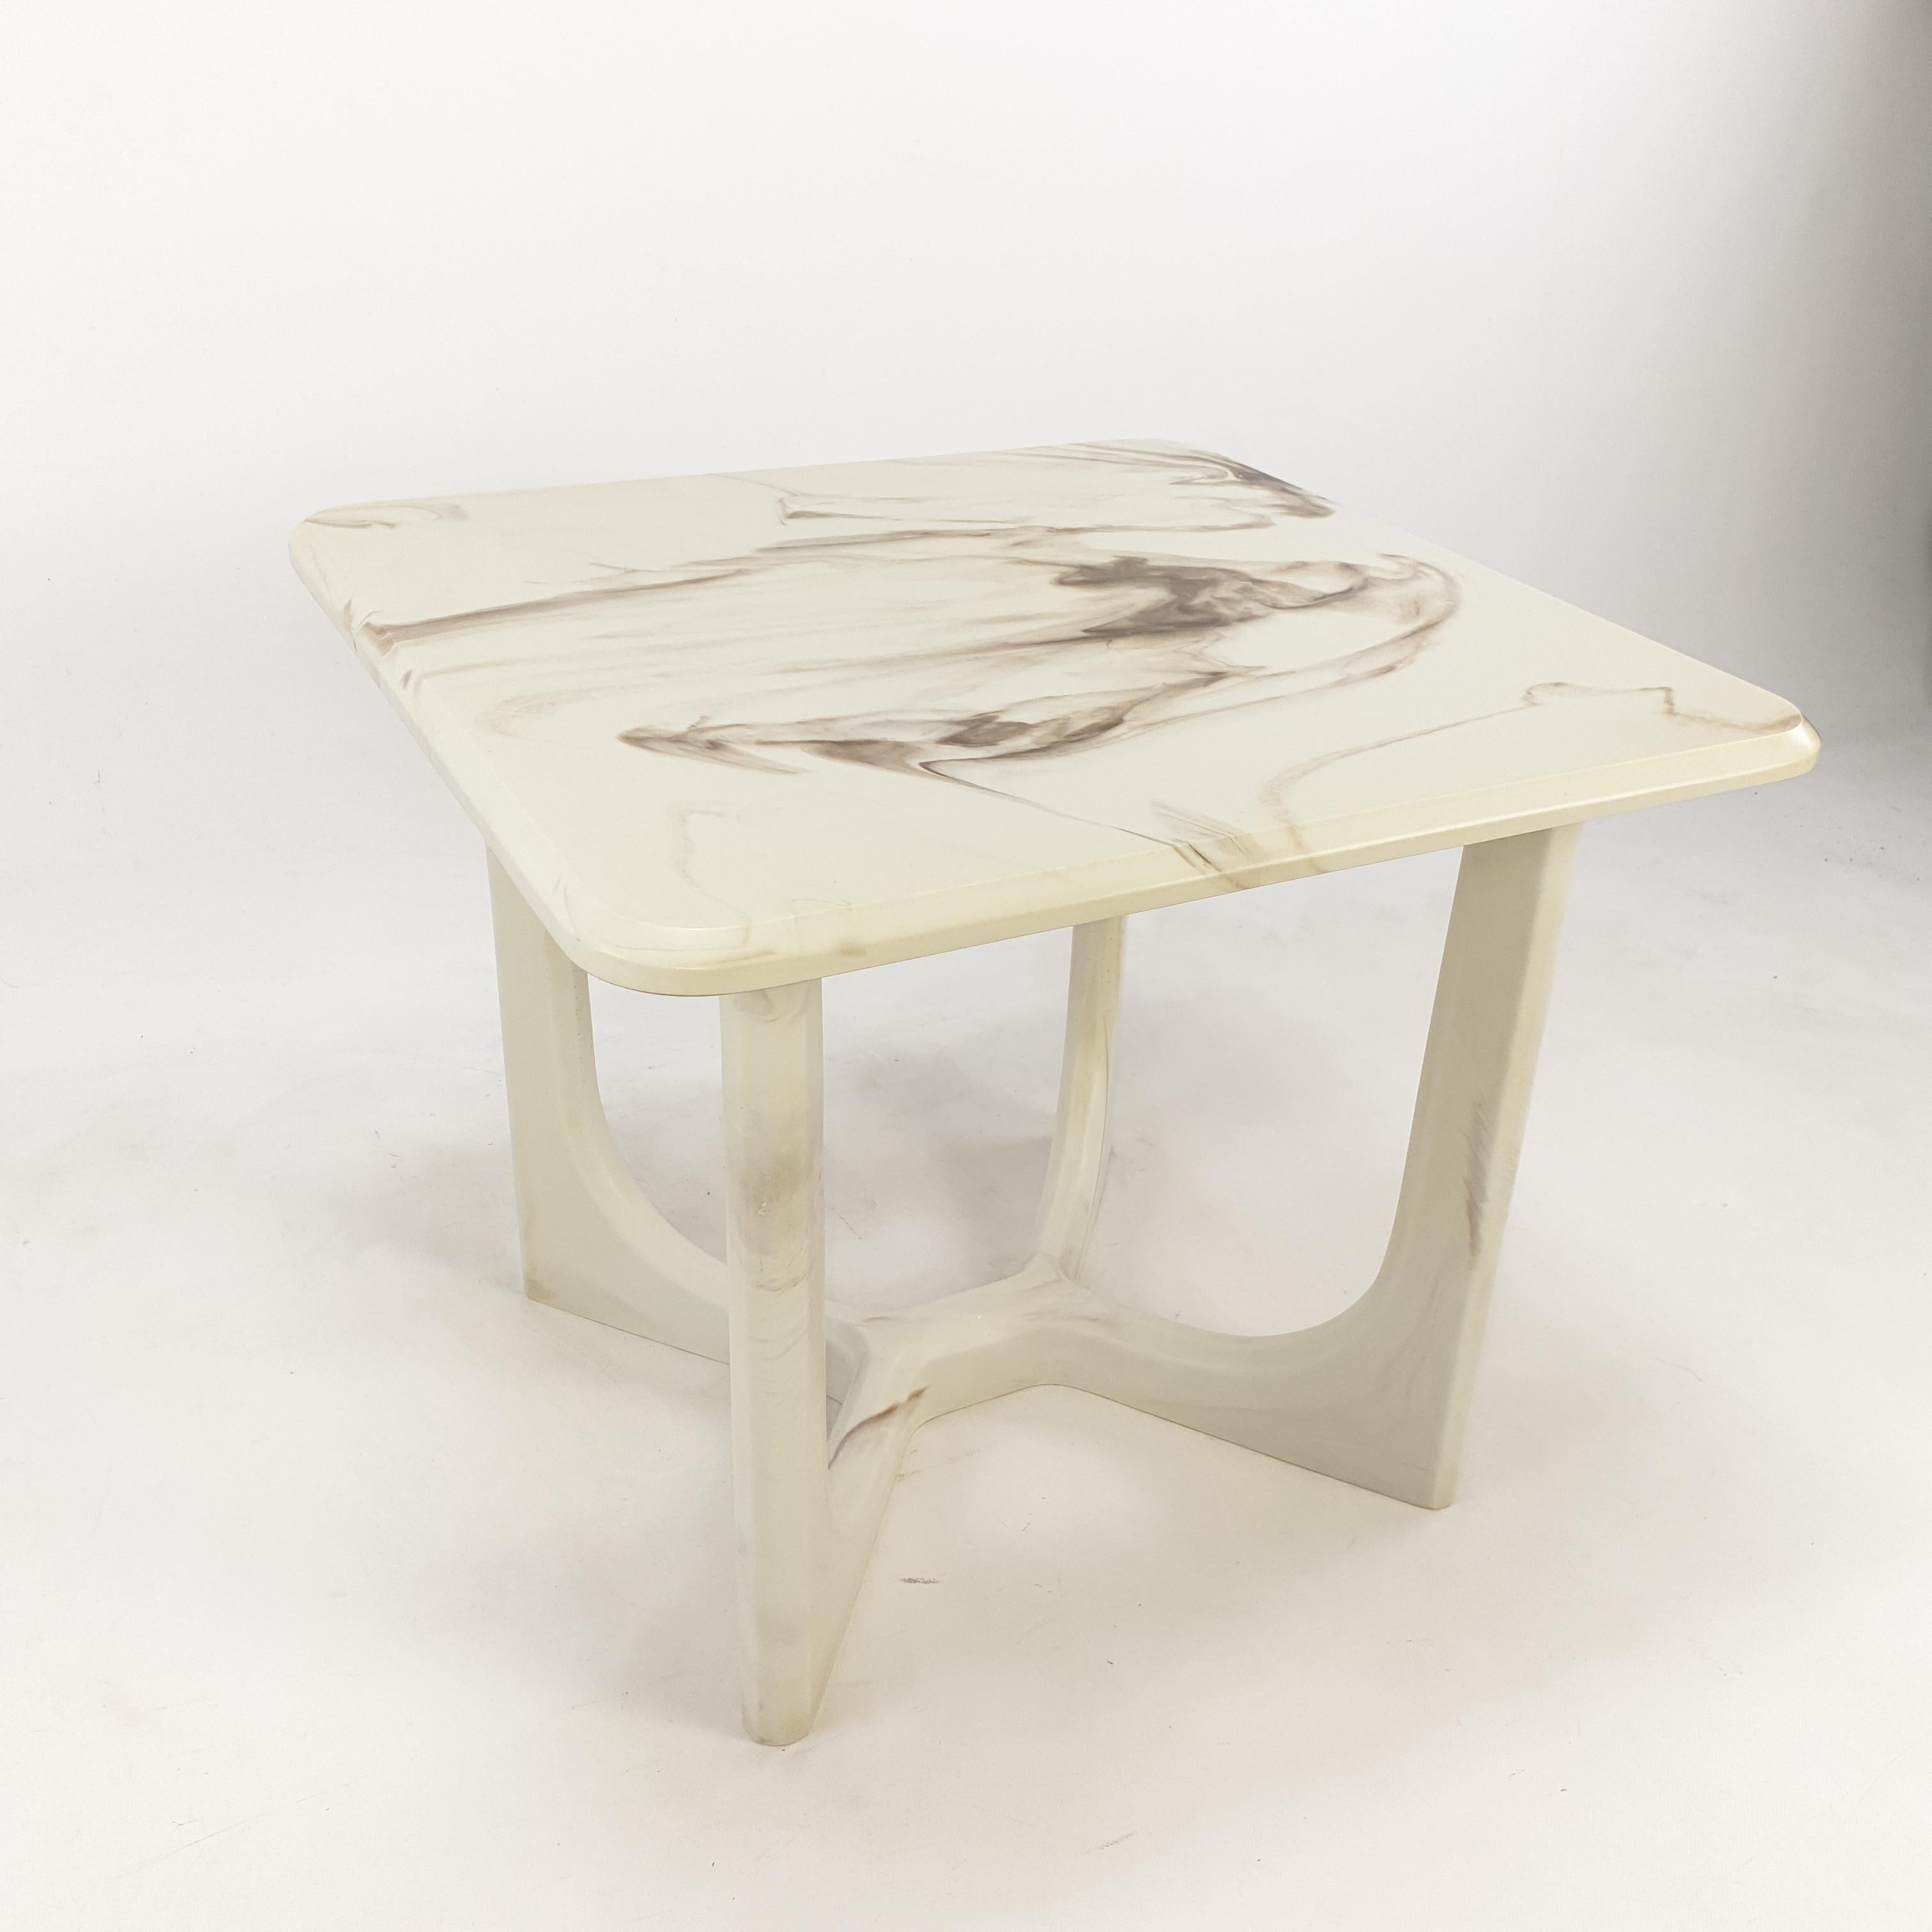 Very nice and rare Italian coffee table of the 50's in Italy. It is made of Marmorino, traditional Venetian polished plaster that look like marble and also has the weight of a marble piece. A very nice plate with a very elegant base.